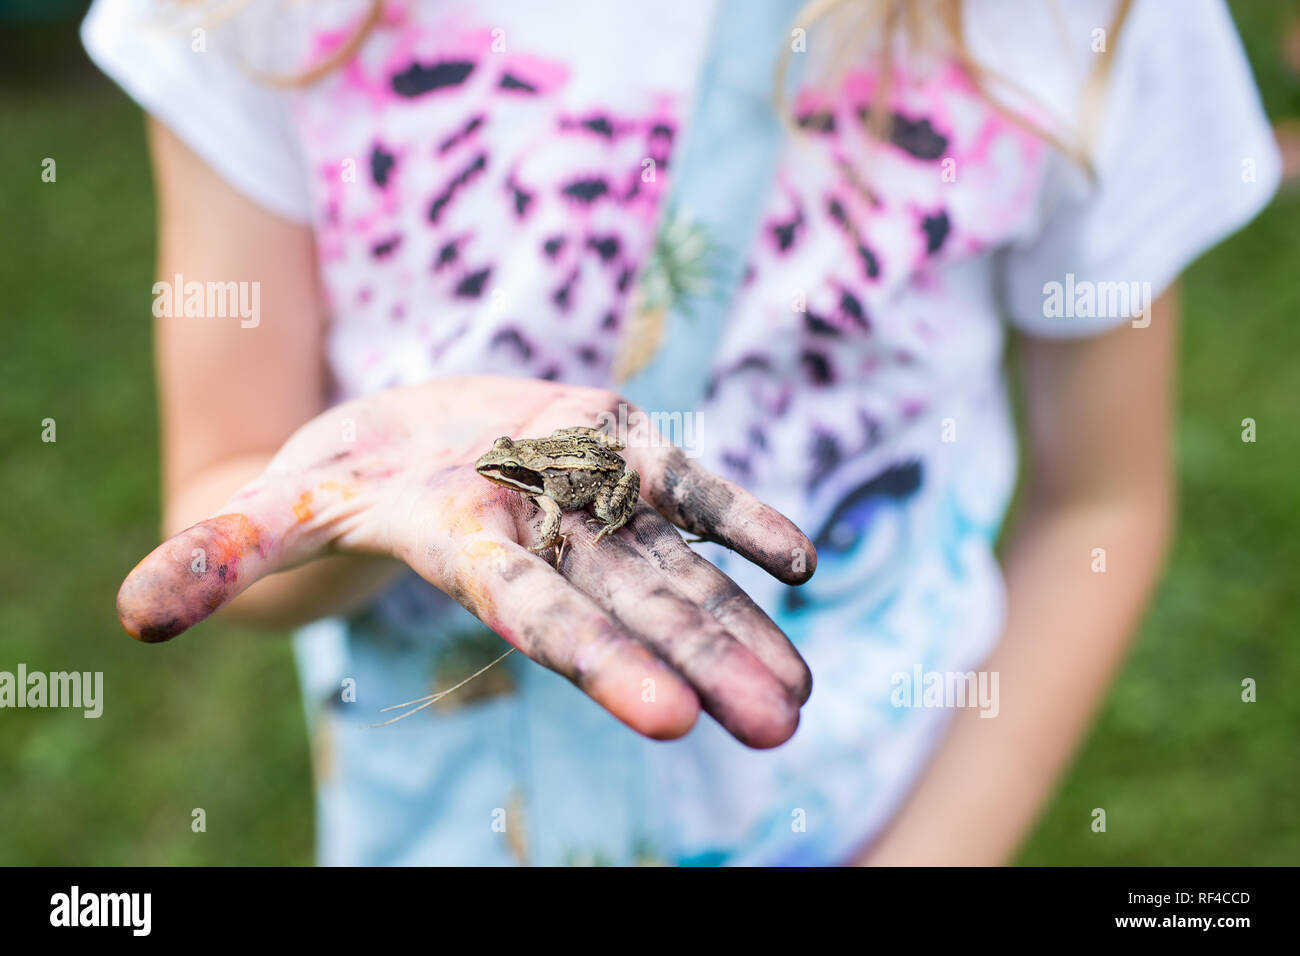 close up of child holding a small frog in dirty hand Stock Photo